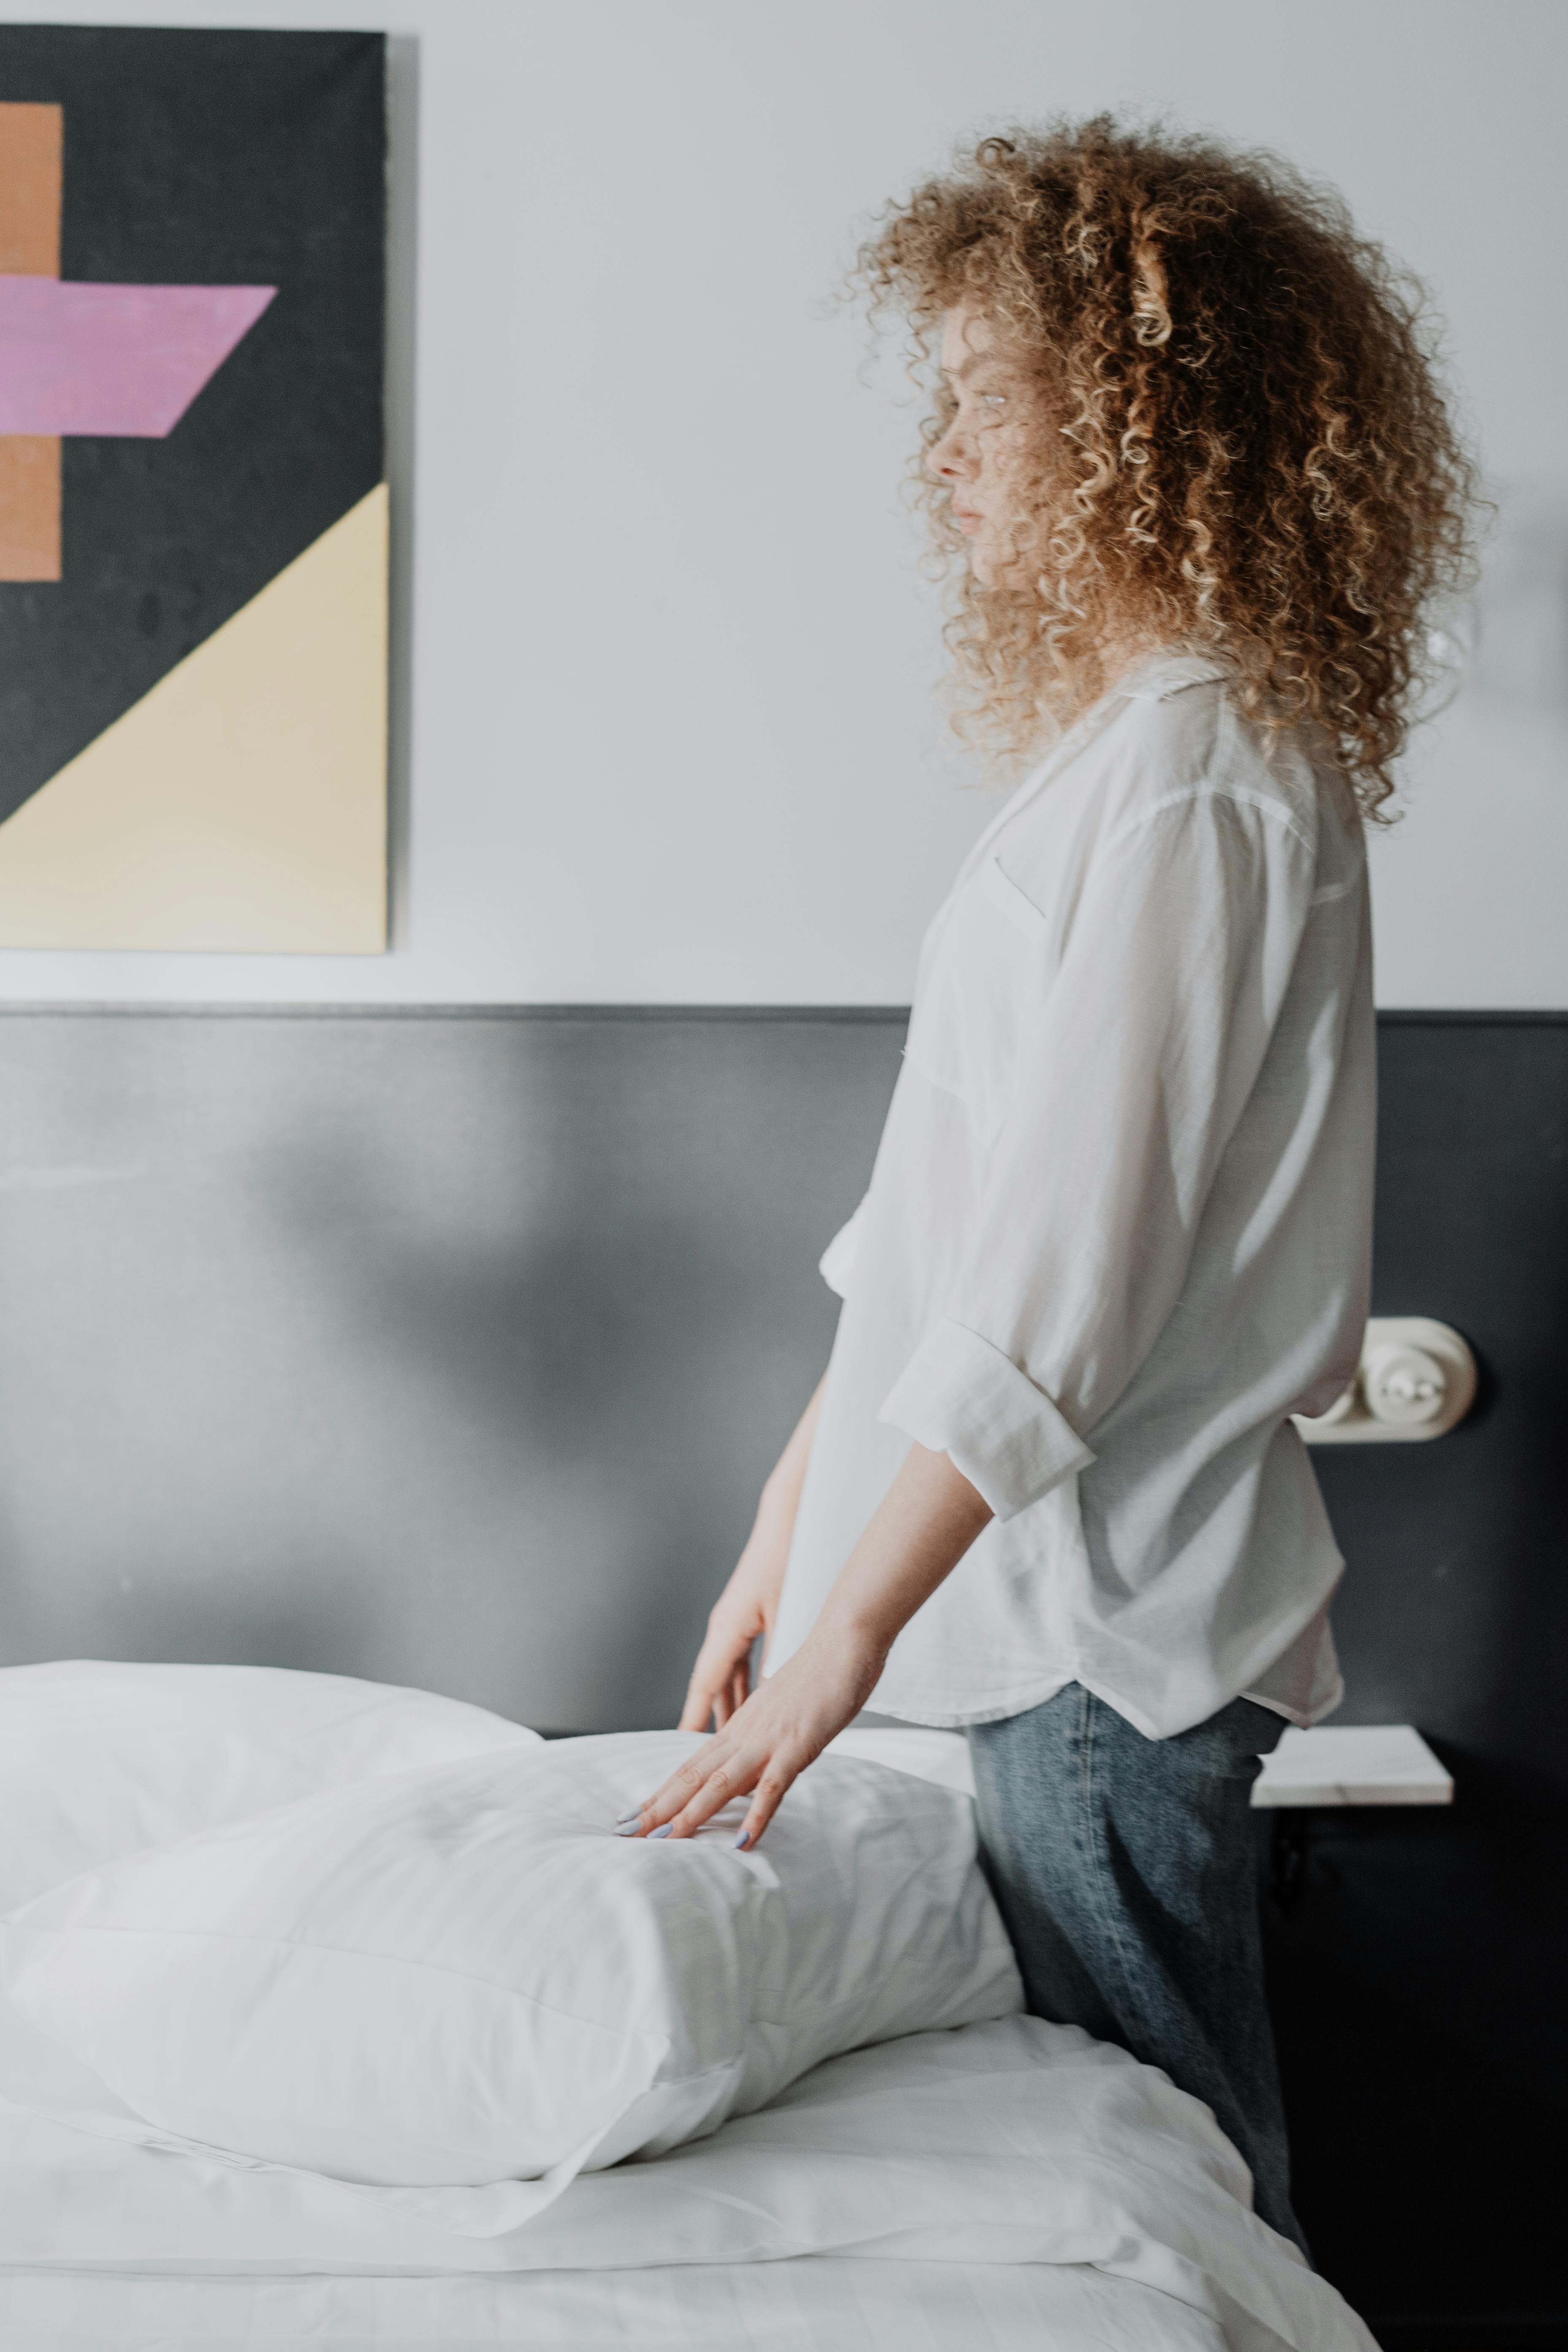 A woman standing by a bed | Source: Pexels